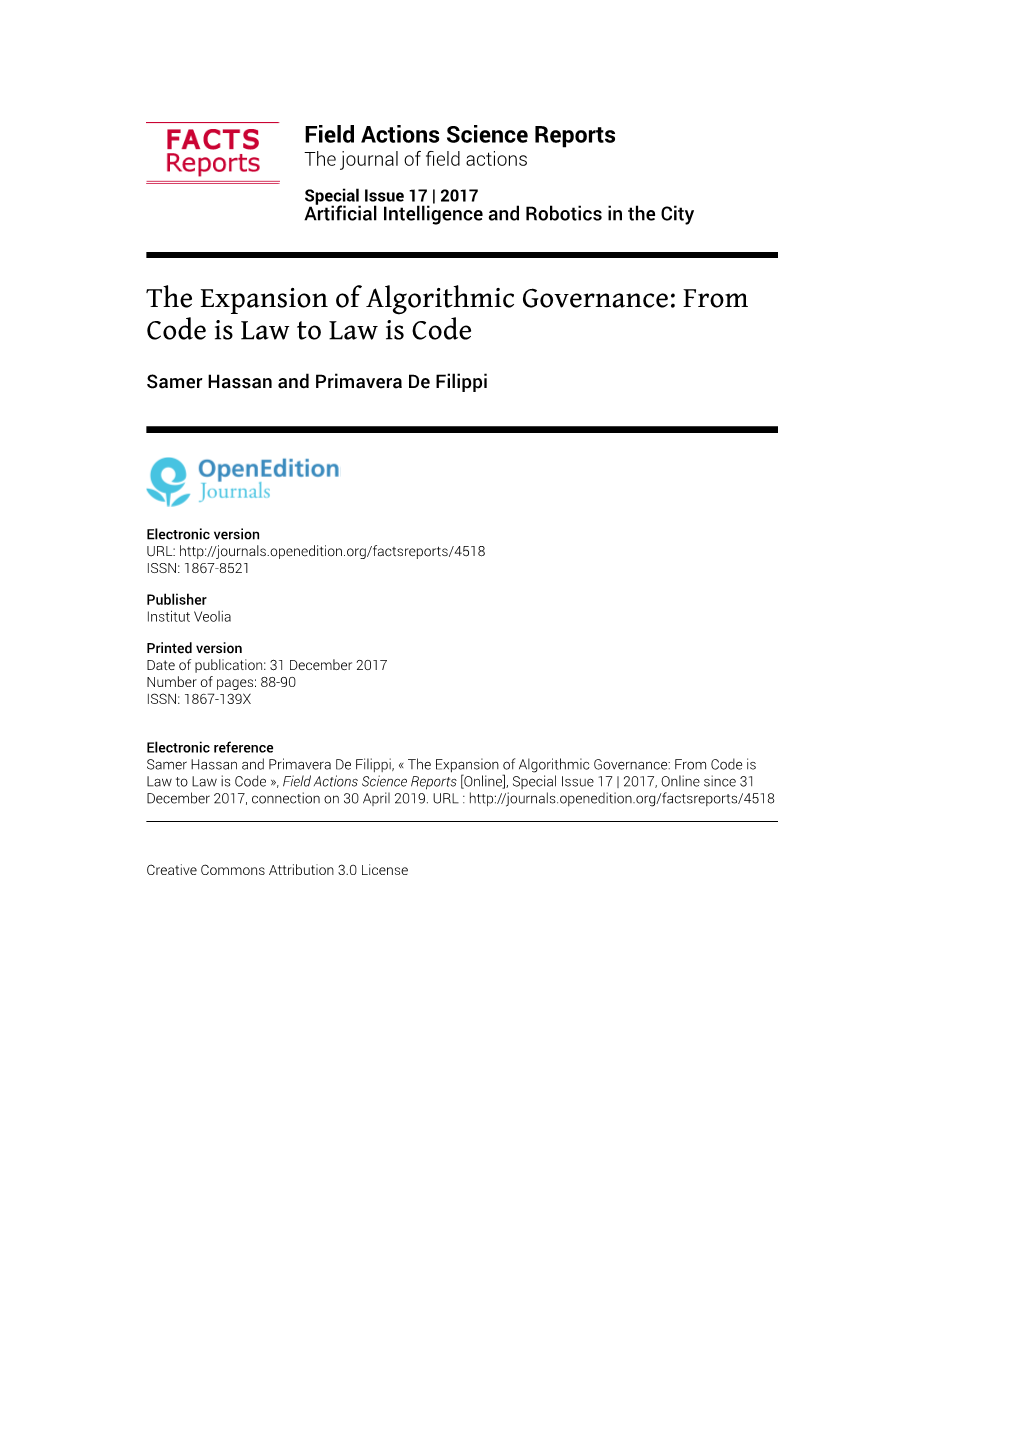 The Expansion of Algorithmic Governance: from Code Is Law to Law Is Code